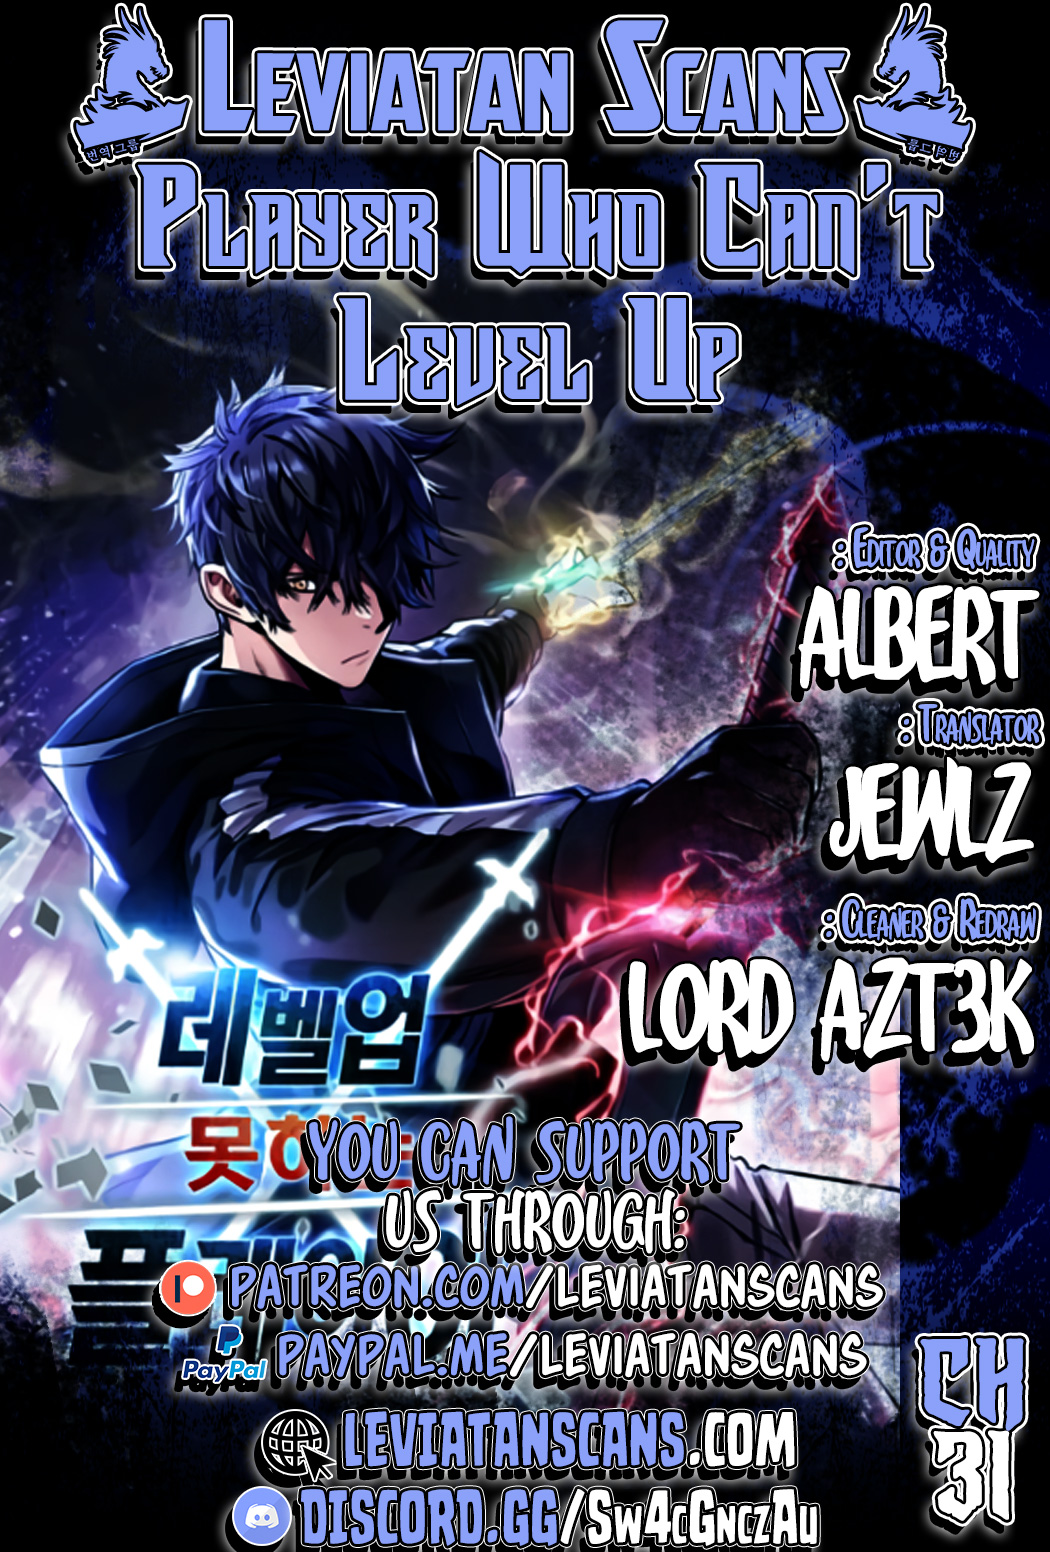 The Player That Can't Level Up - Chapter 4879 - Image 1